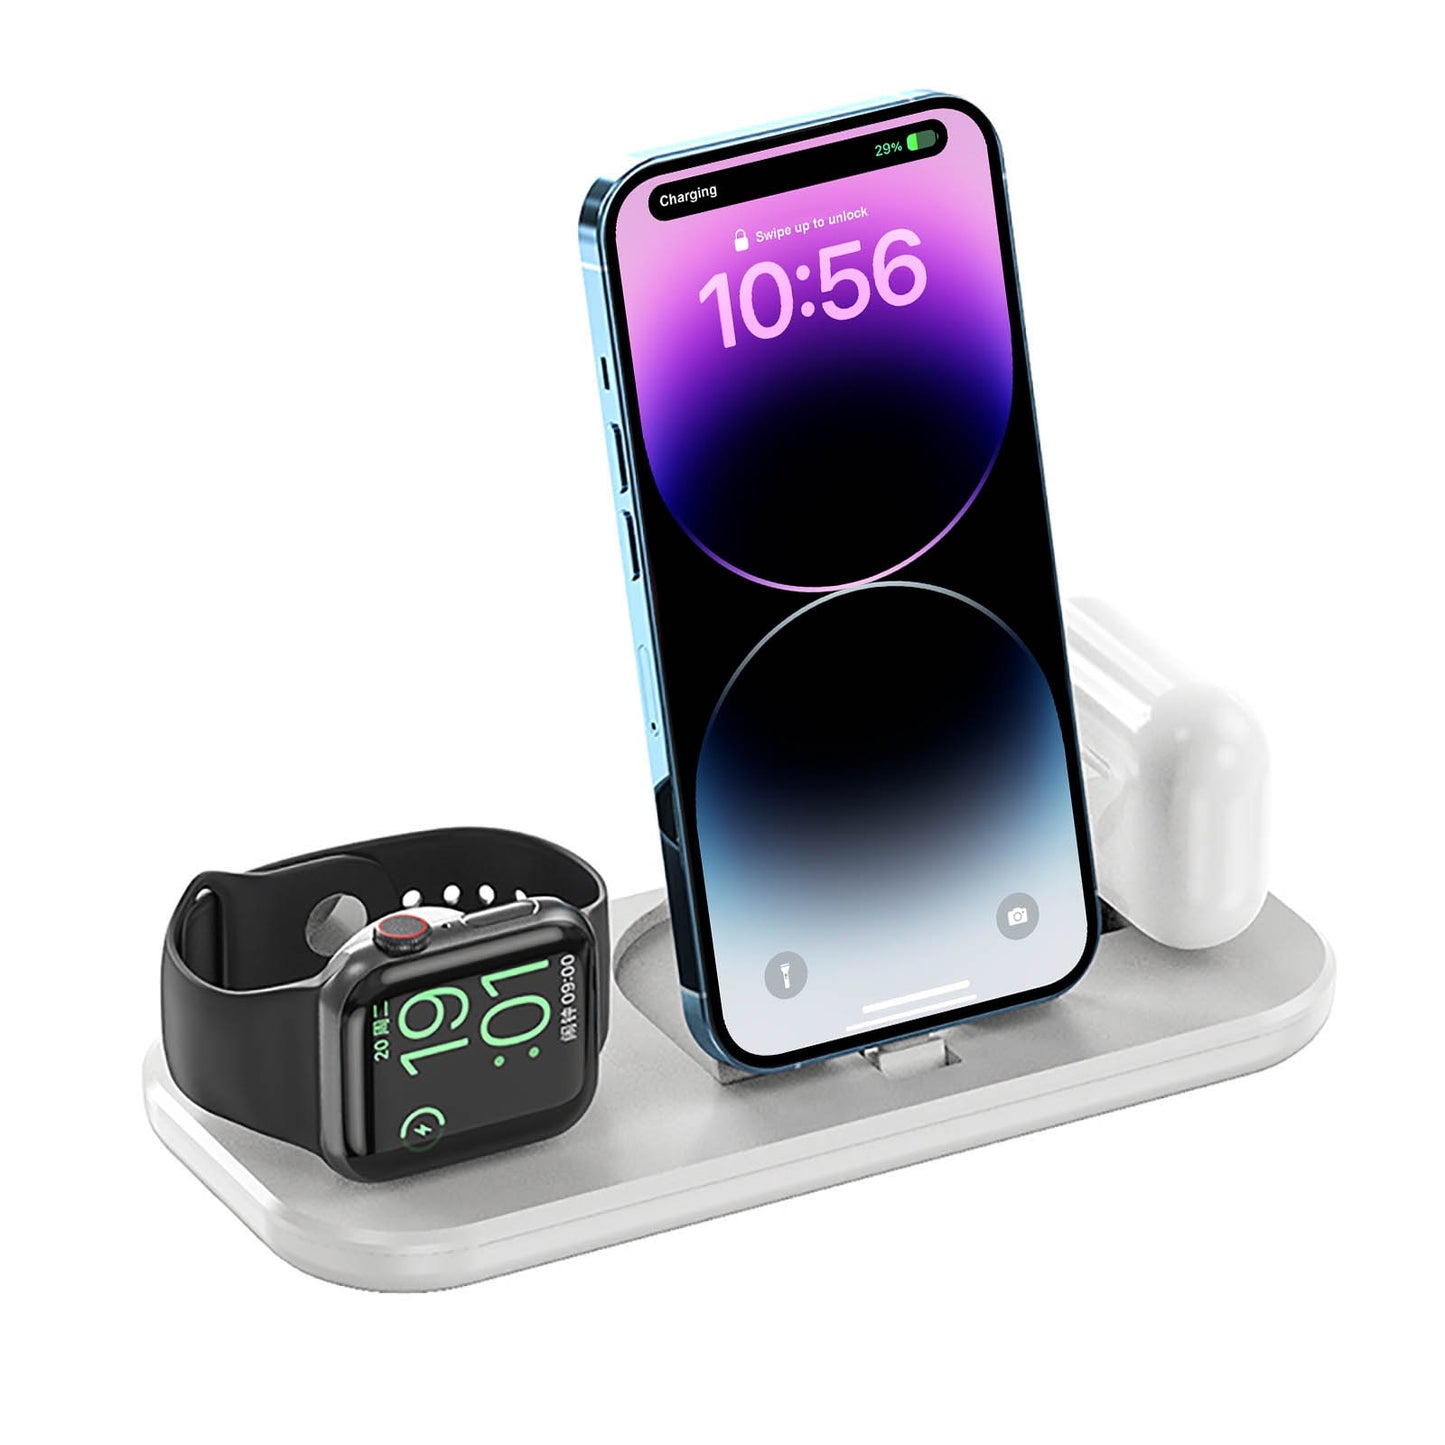 3 in 1 Wireless Charger Foldable Fast Charging Station